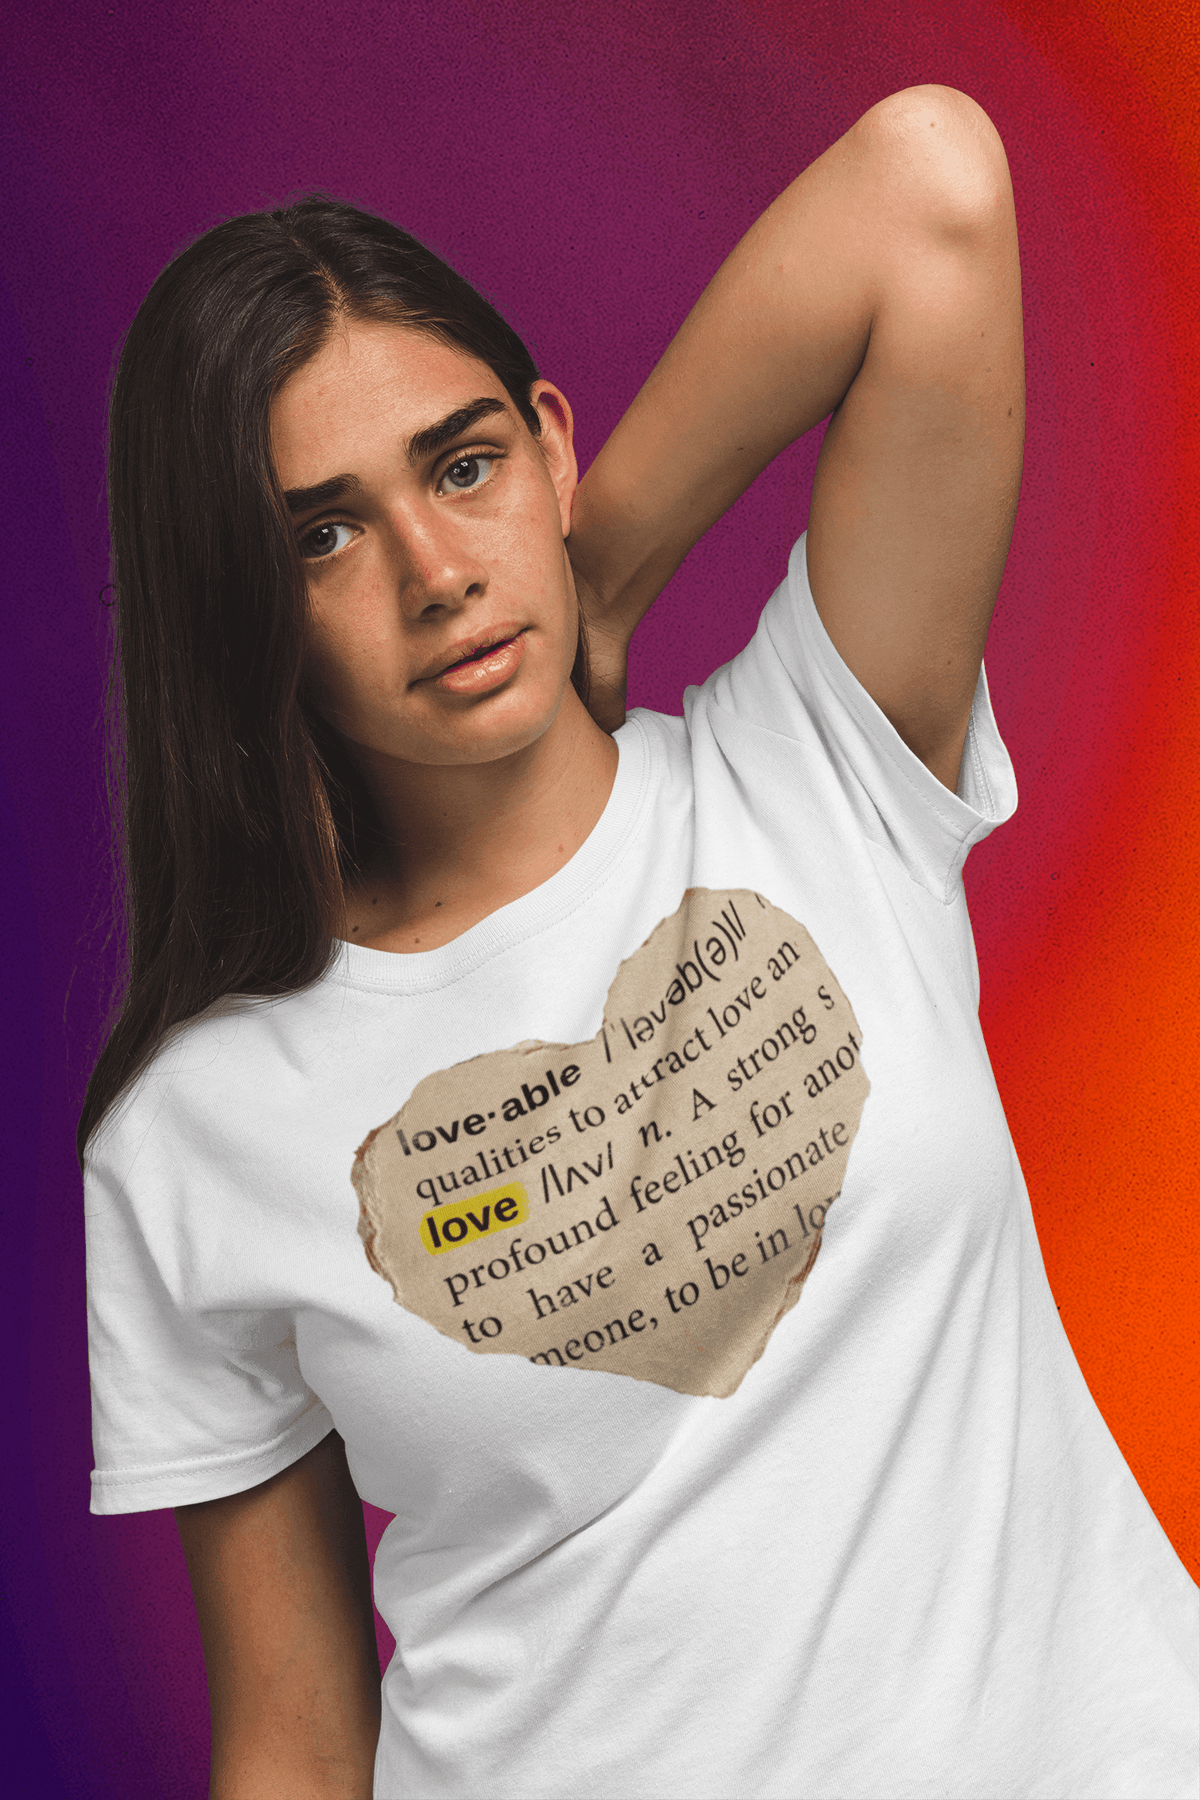 Love able message outspoken Womens T-shirt-Regular Fit Tee-StylinArts